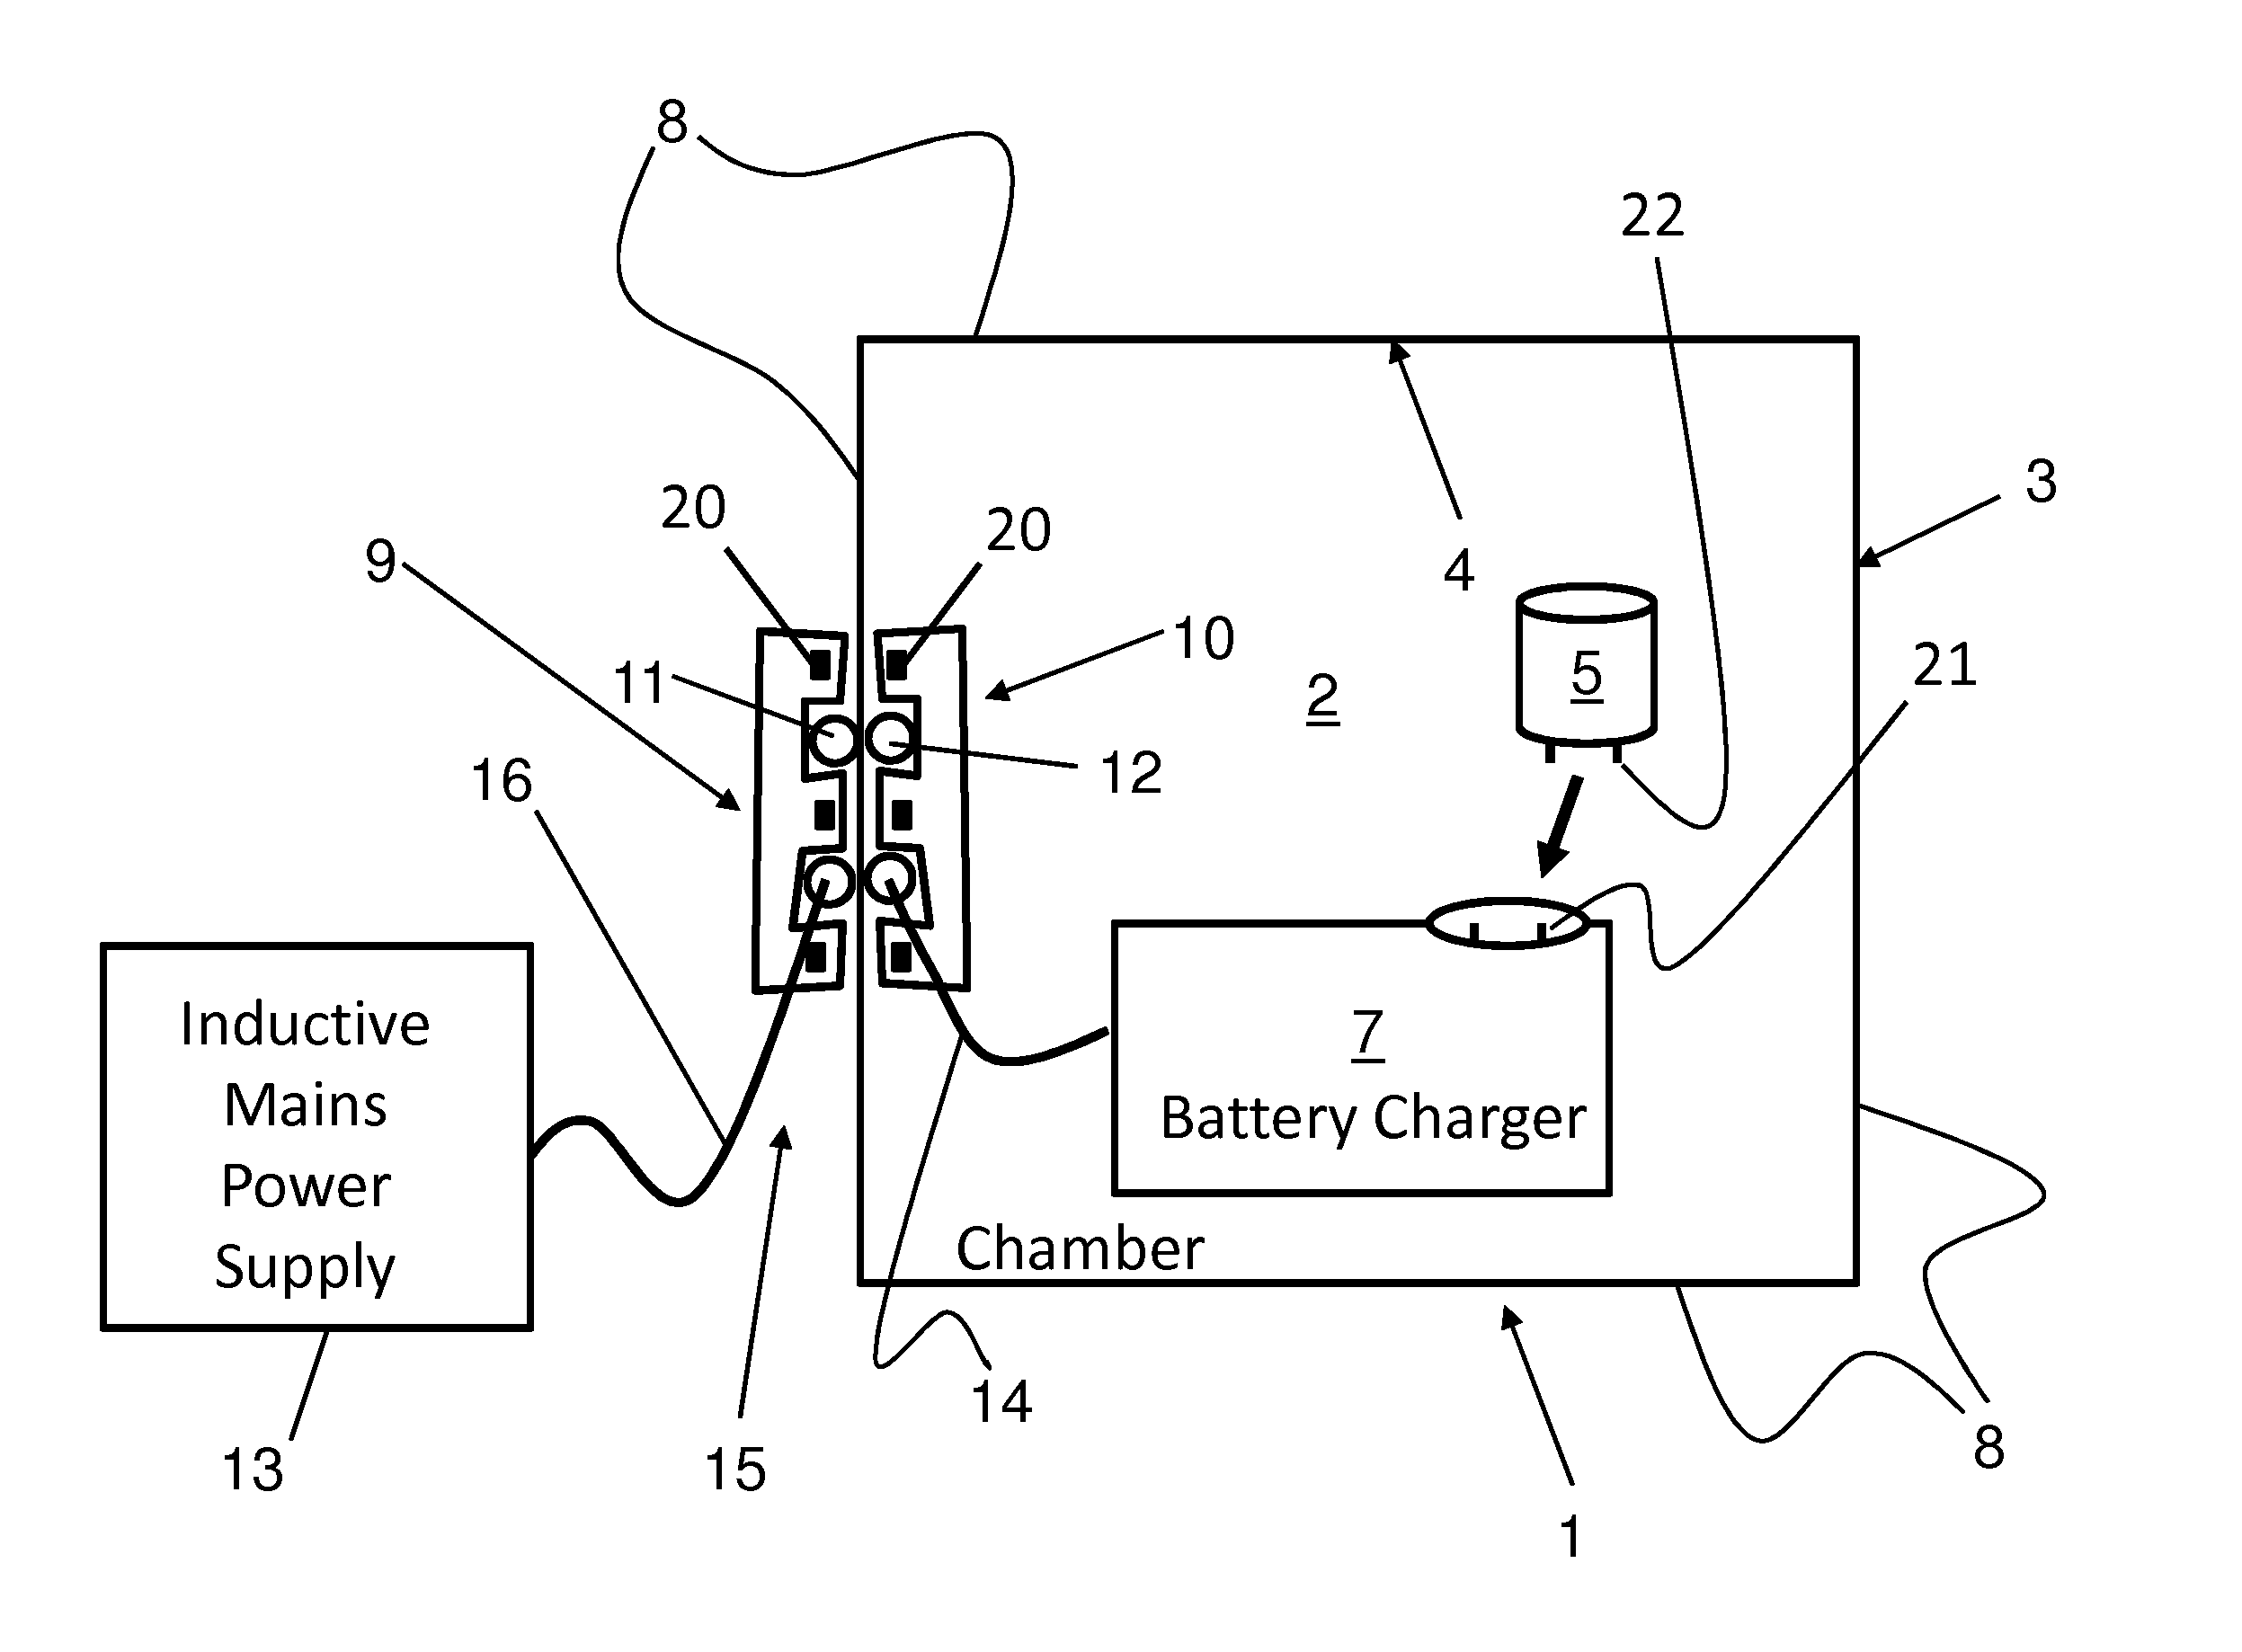 Inductive Battery Charging Device for Use with a Surgical Sterilizer